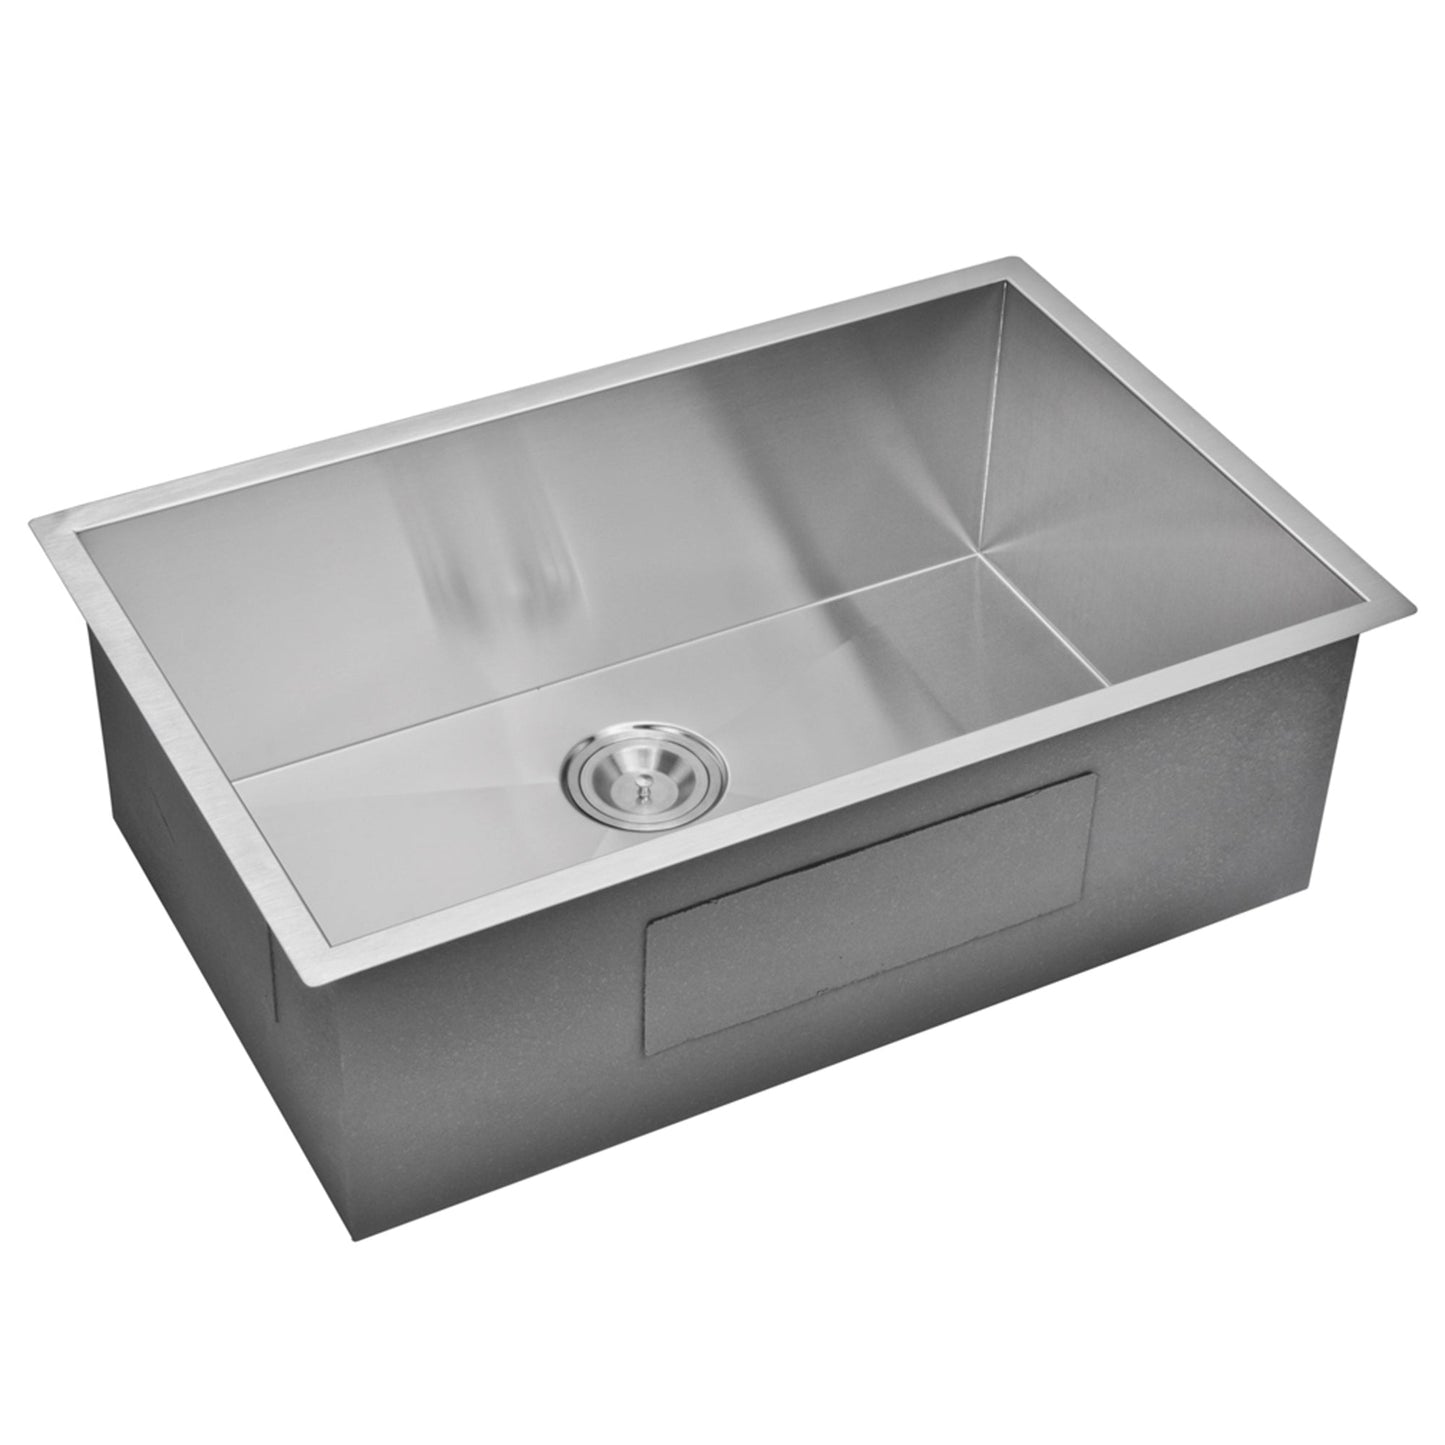 Water Creation Zero Radius Single Bowl Stainless Steel Hand Made Undermount 32 Inch X 19 Inch Sink With Drain, Strainer, And Bottom Grid